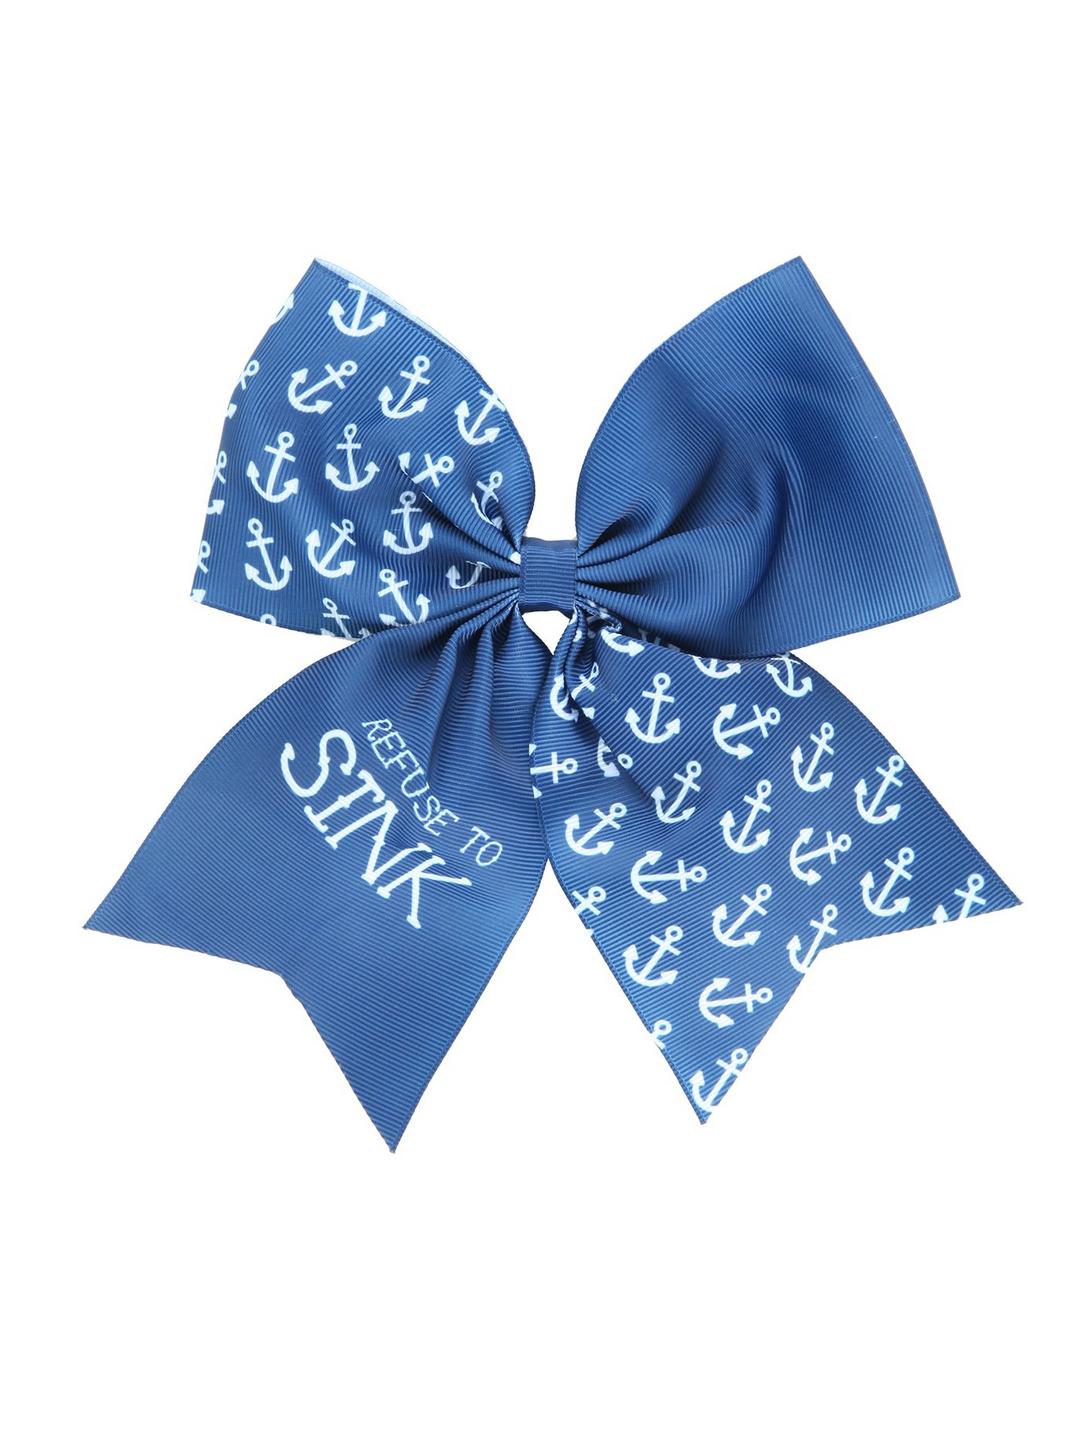 Blackheart Refuse To Sink Cheer Bow, , hi-res